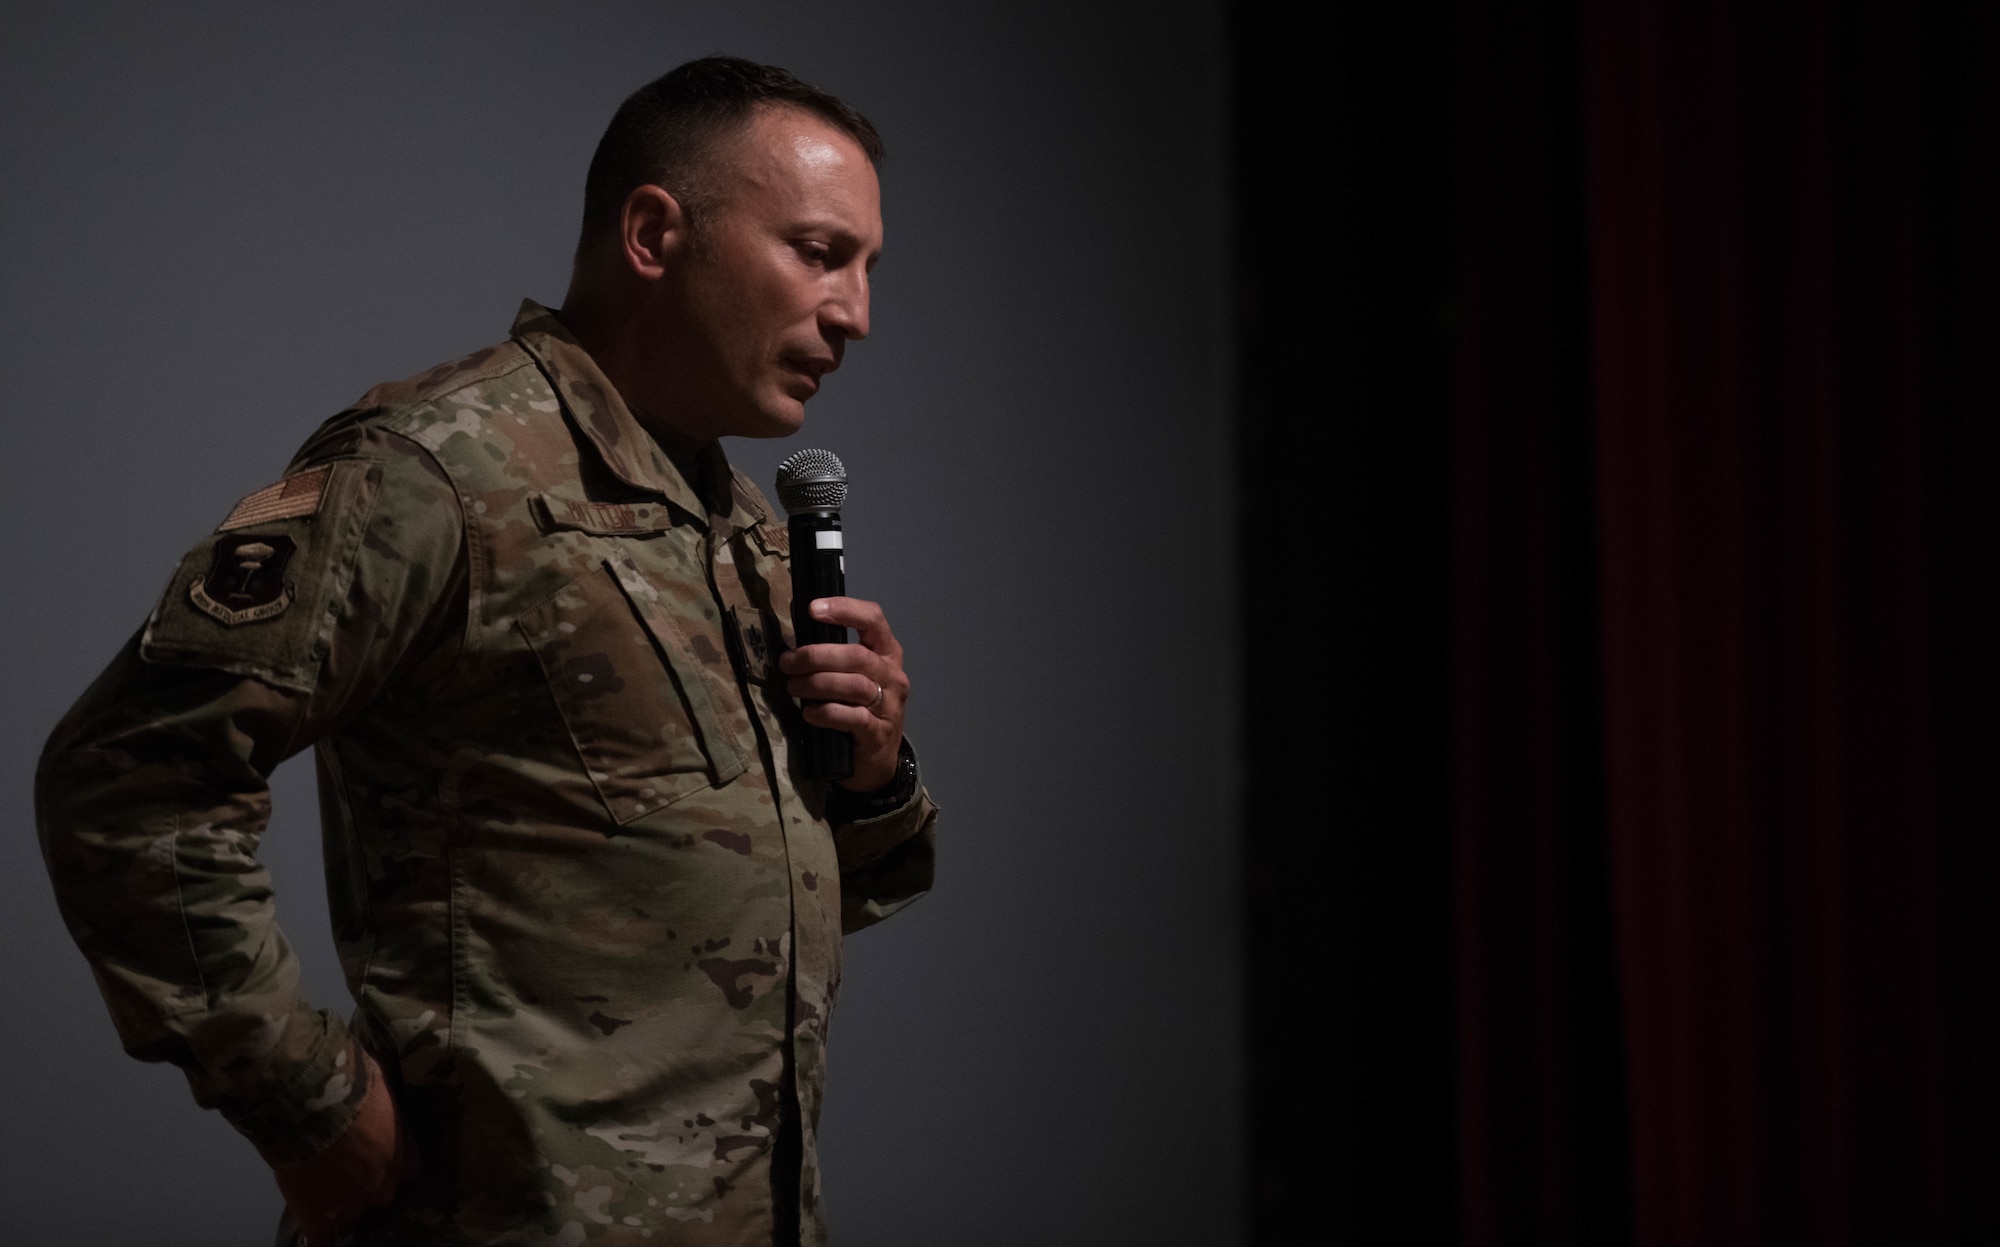 U.S. Air Force Lt. Col. (Dr.) Christopher Button, 509th Mental Health Flight commander, speaks at an event highlighting the effects of sleep deprivation on mental health at Whiteman Air Force Base, Missouri, July 17, 2020. The event discussed the connection between a proper sleep schedule and its benefits to mental health. (U.S. Air Force photo by Senior Airman Thomas Johns.)